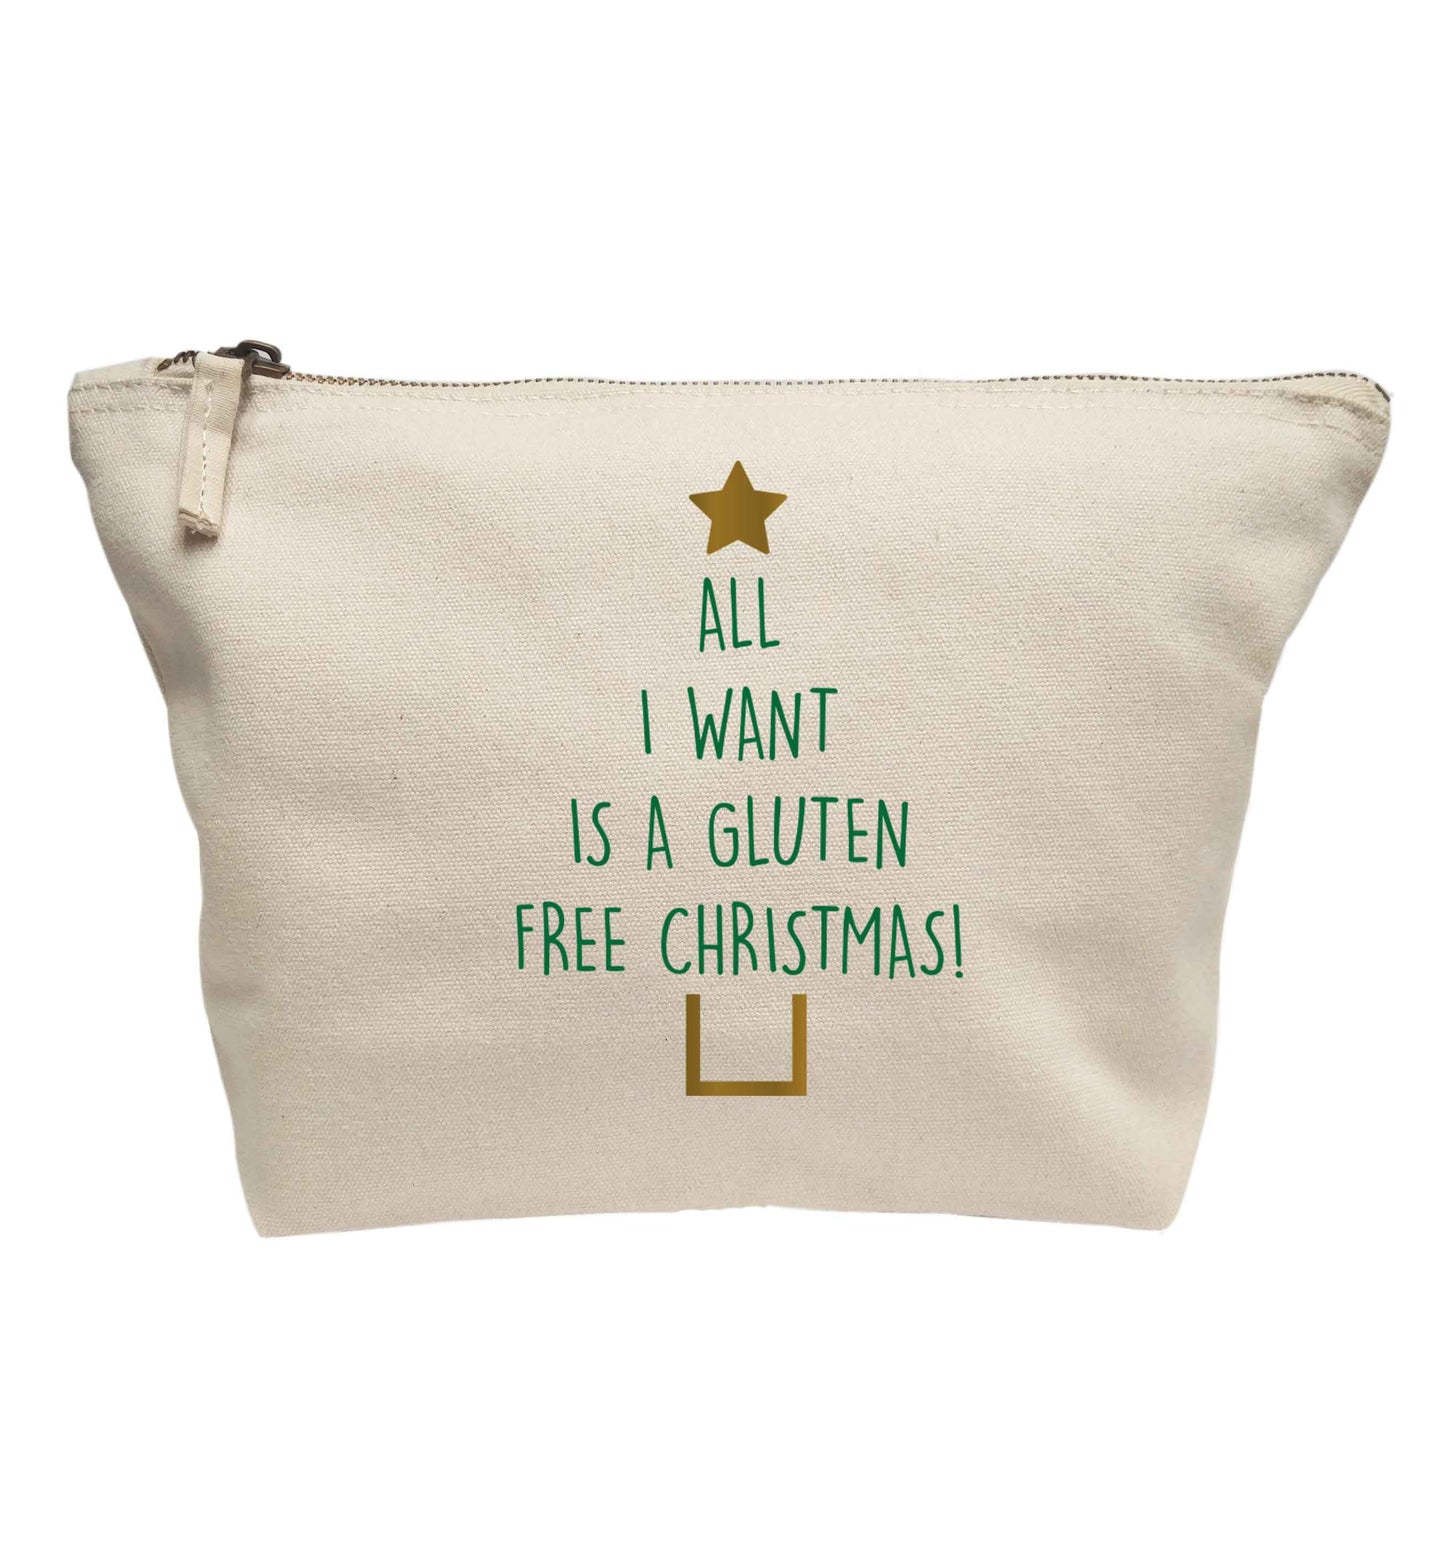 All I want is a gluten free Christmas | makeup / wash bag